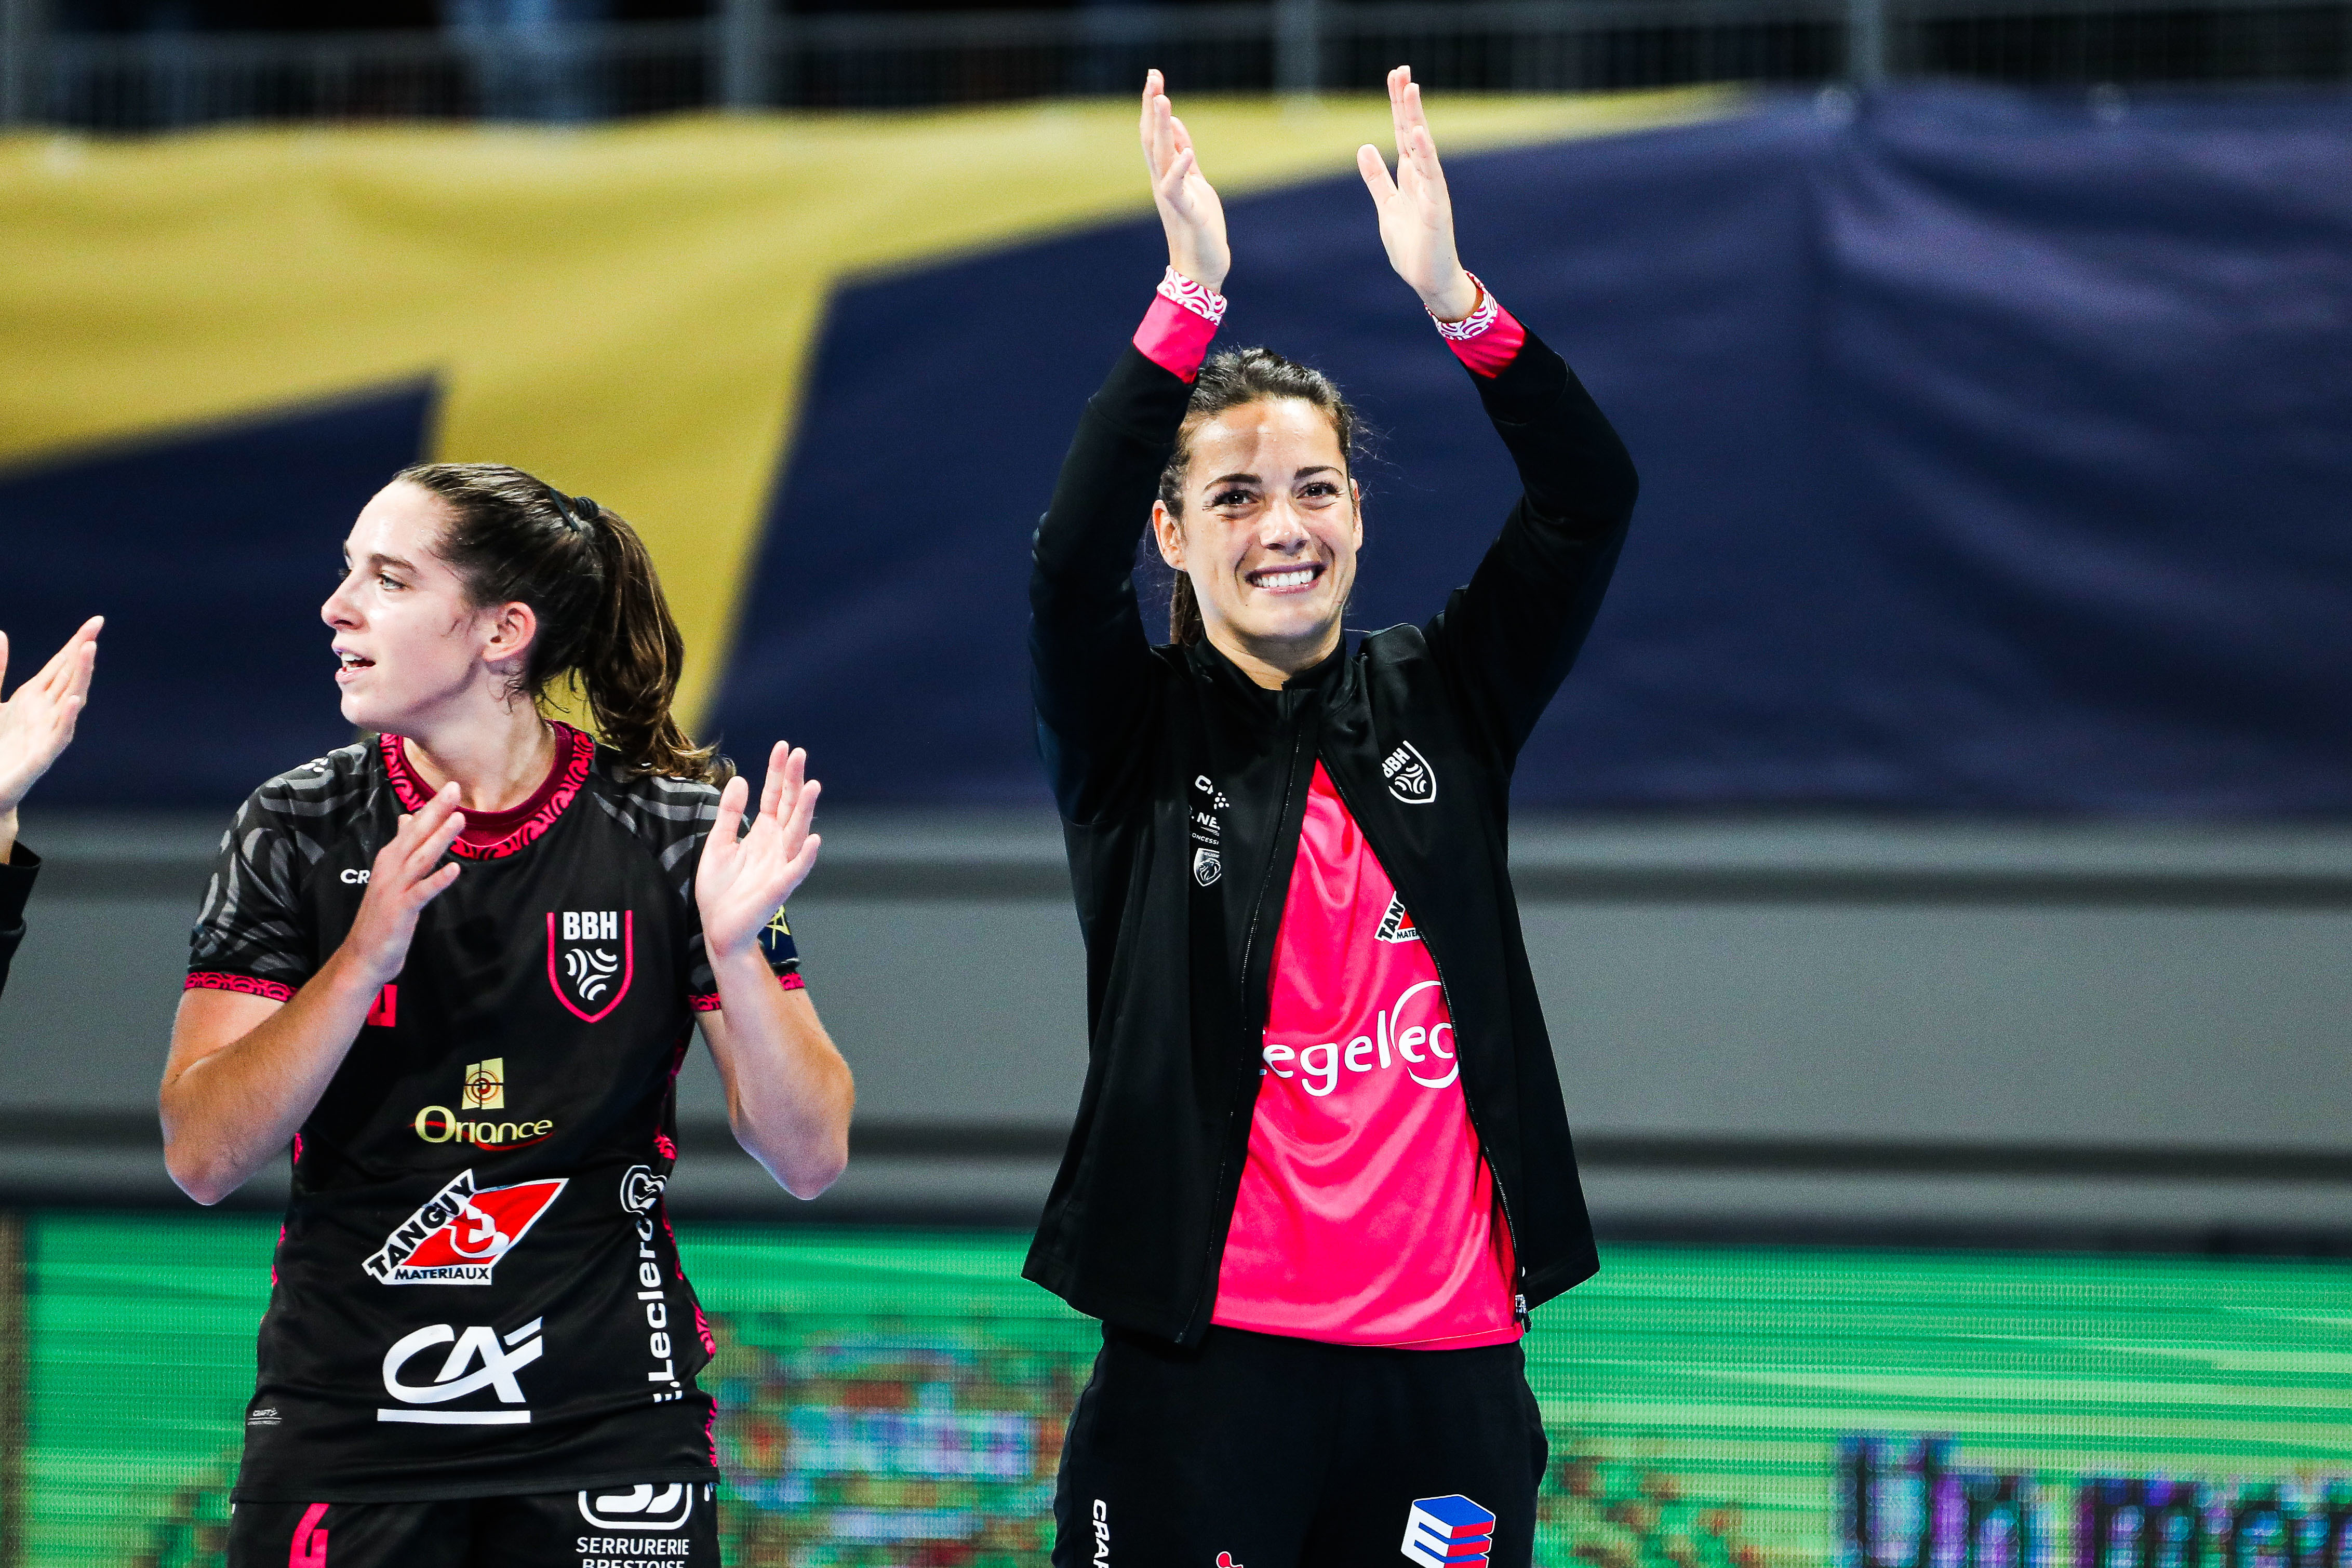 Cleopatre DARLEUX of Brest during the EHF Women's Champions League match between Brest and Podgorica on November 13, 2021 in Brest, France. (Photo by Maxime Le Pihif/Icon Sport)